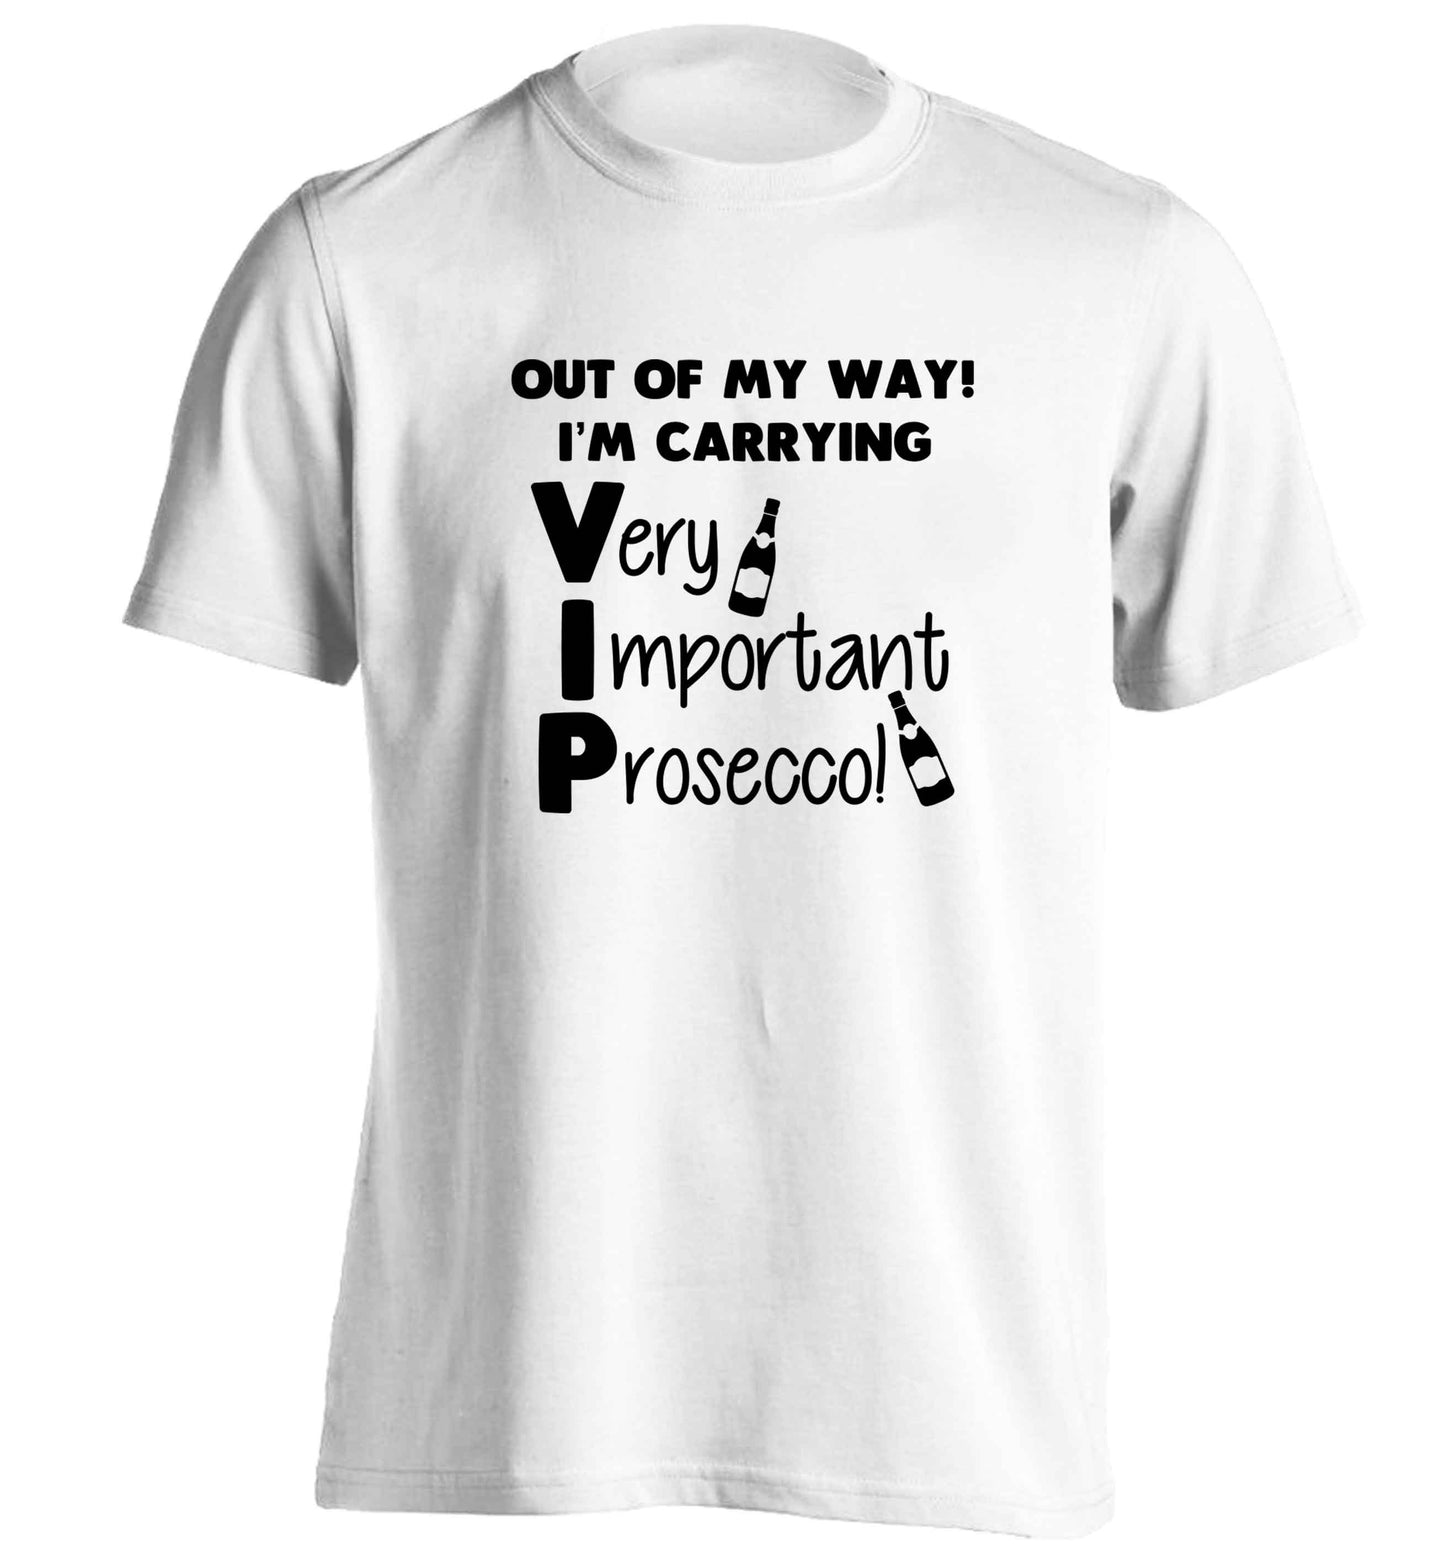 Out of my way I'm carrying very important prosecco! adults unisex white Tshirt 2XL